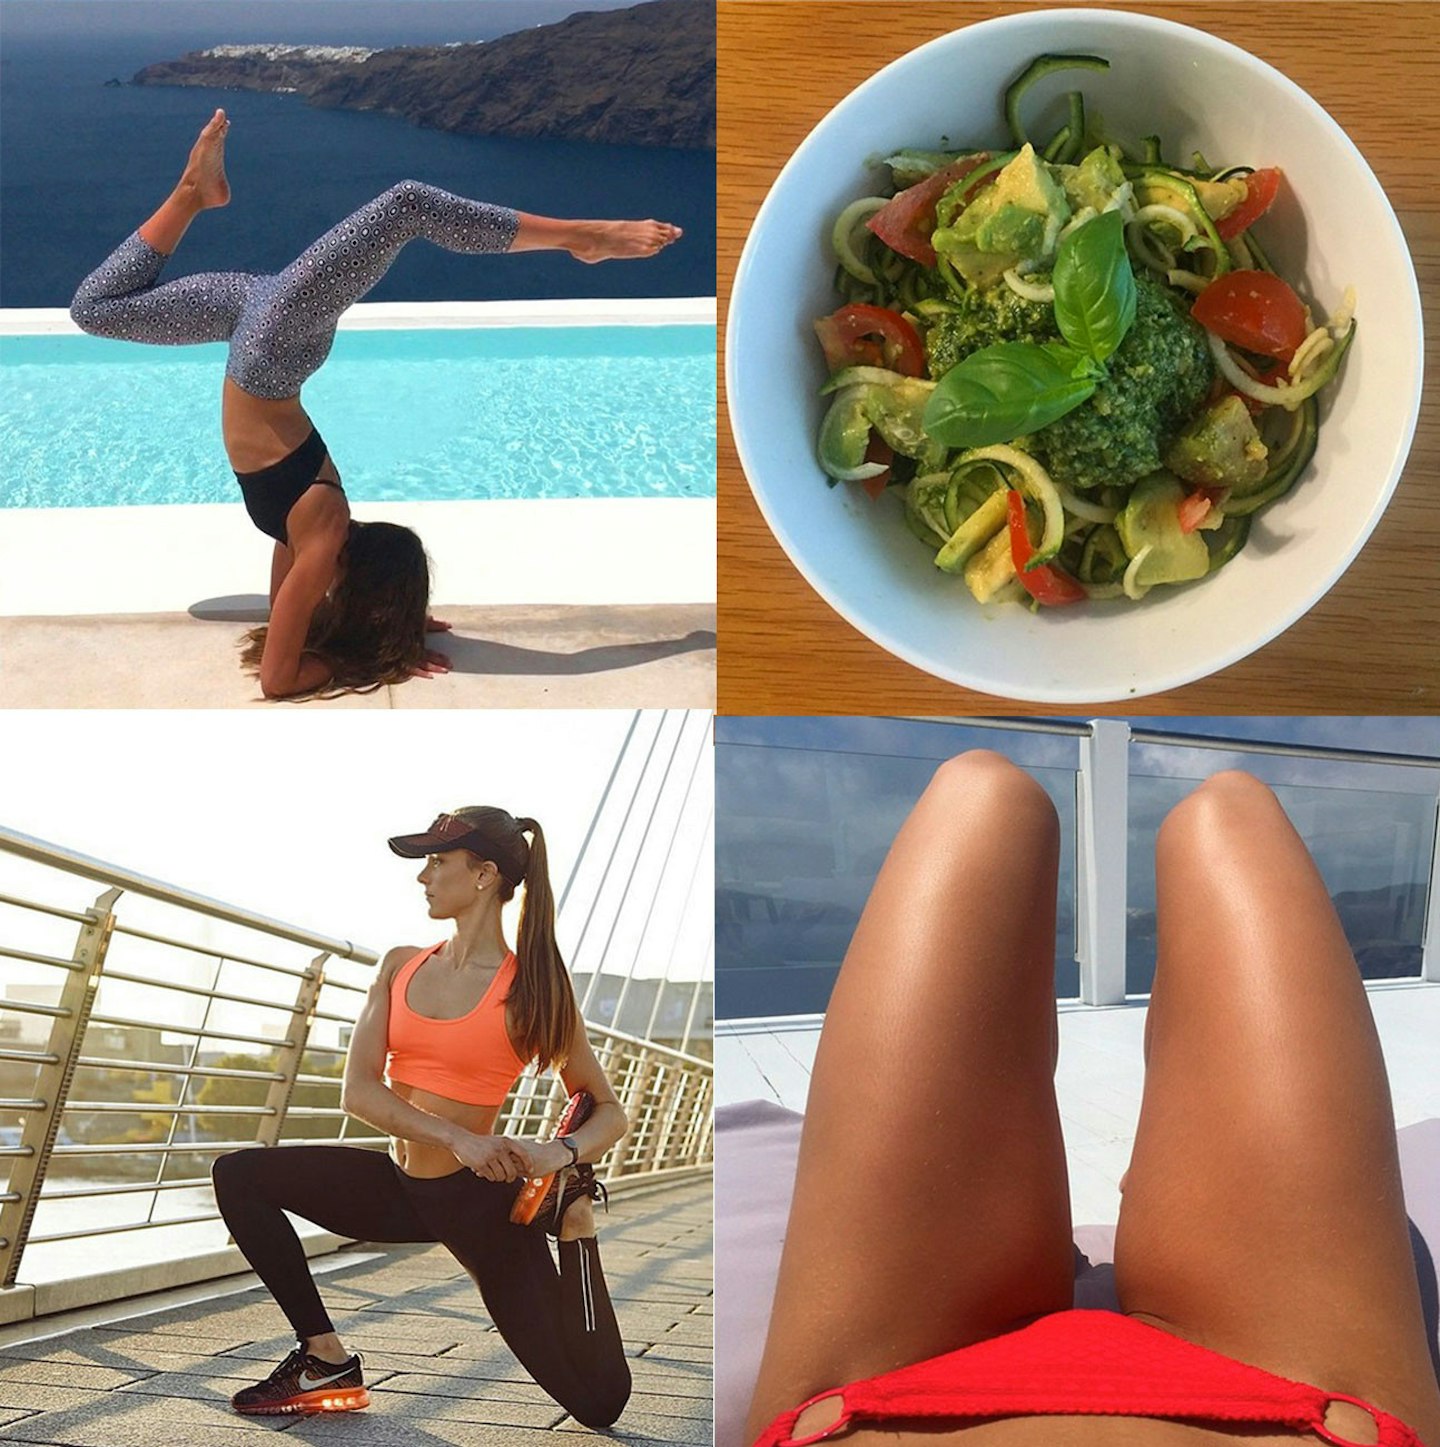 Celia Learmonth's Instagram feed shows her healthy-looking meals and exercise regime